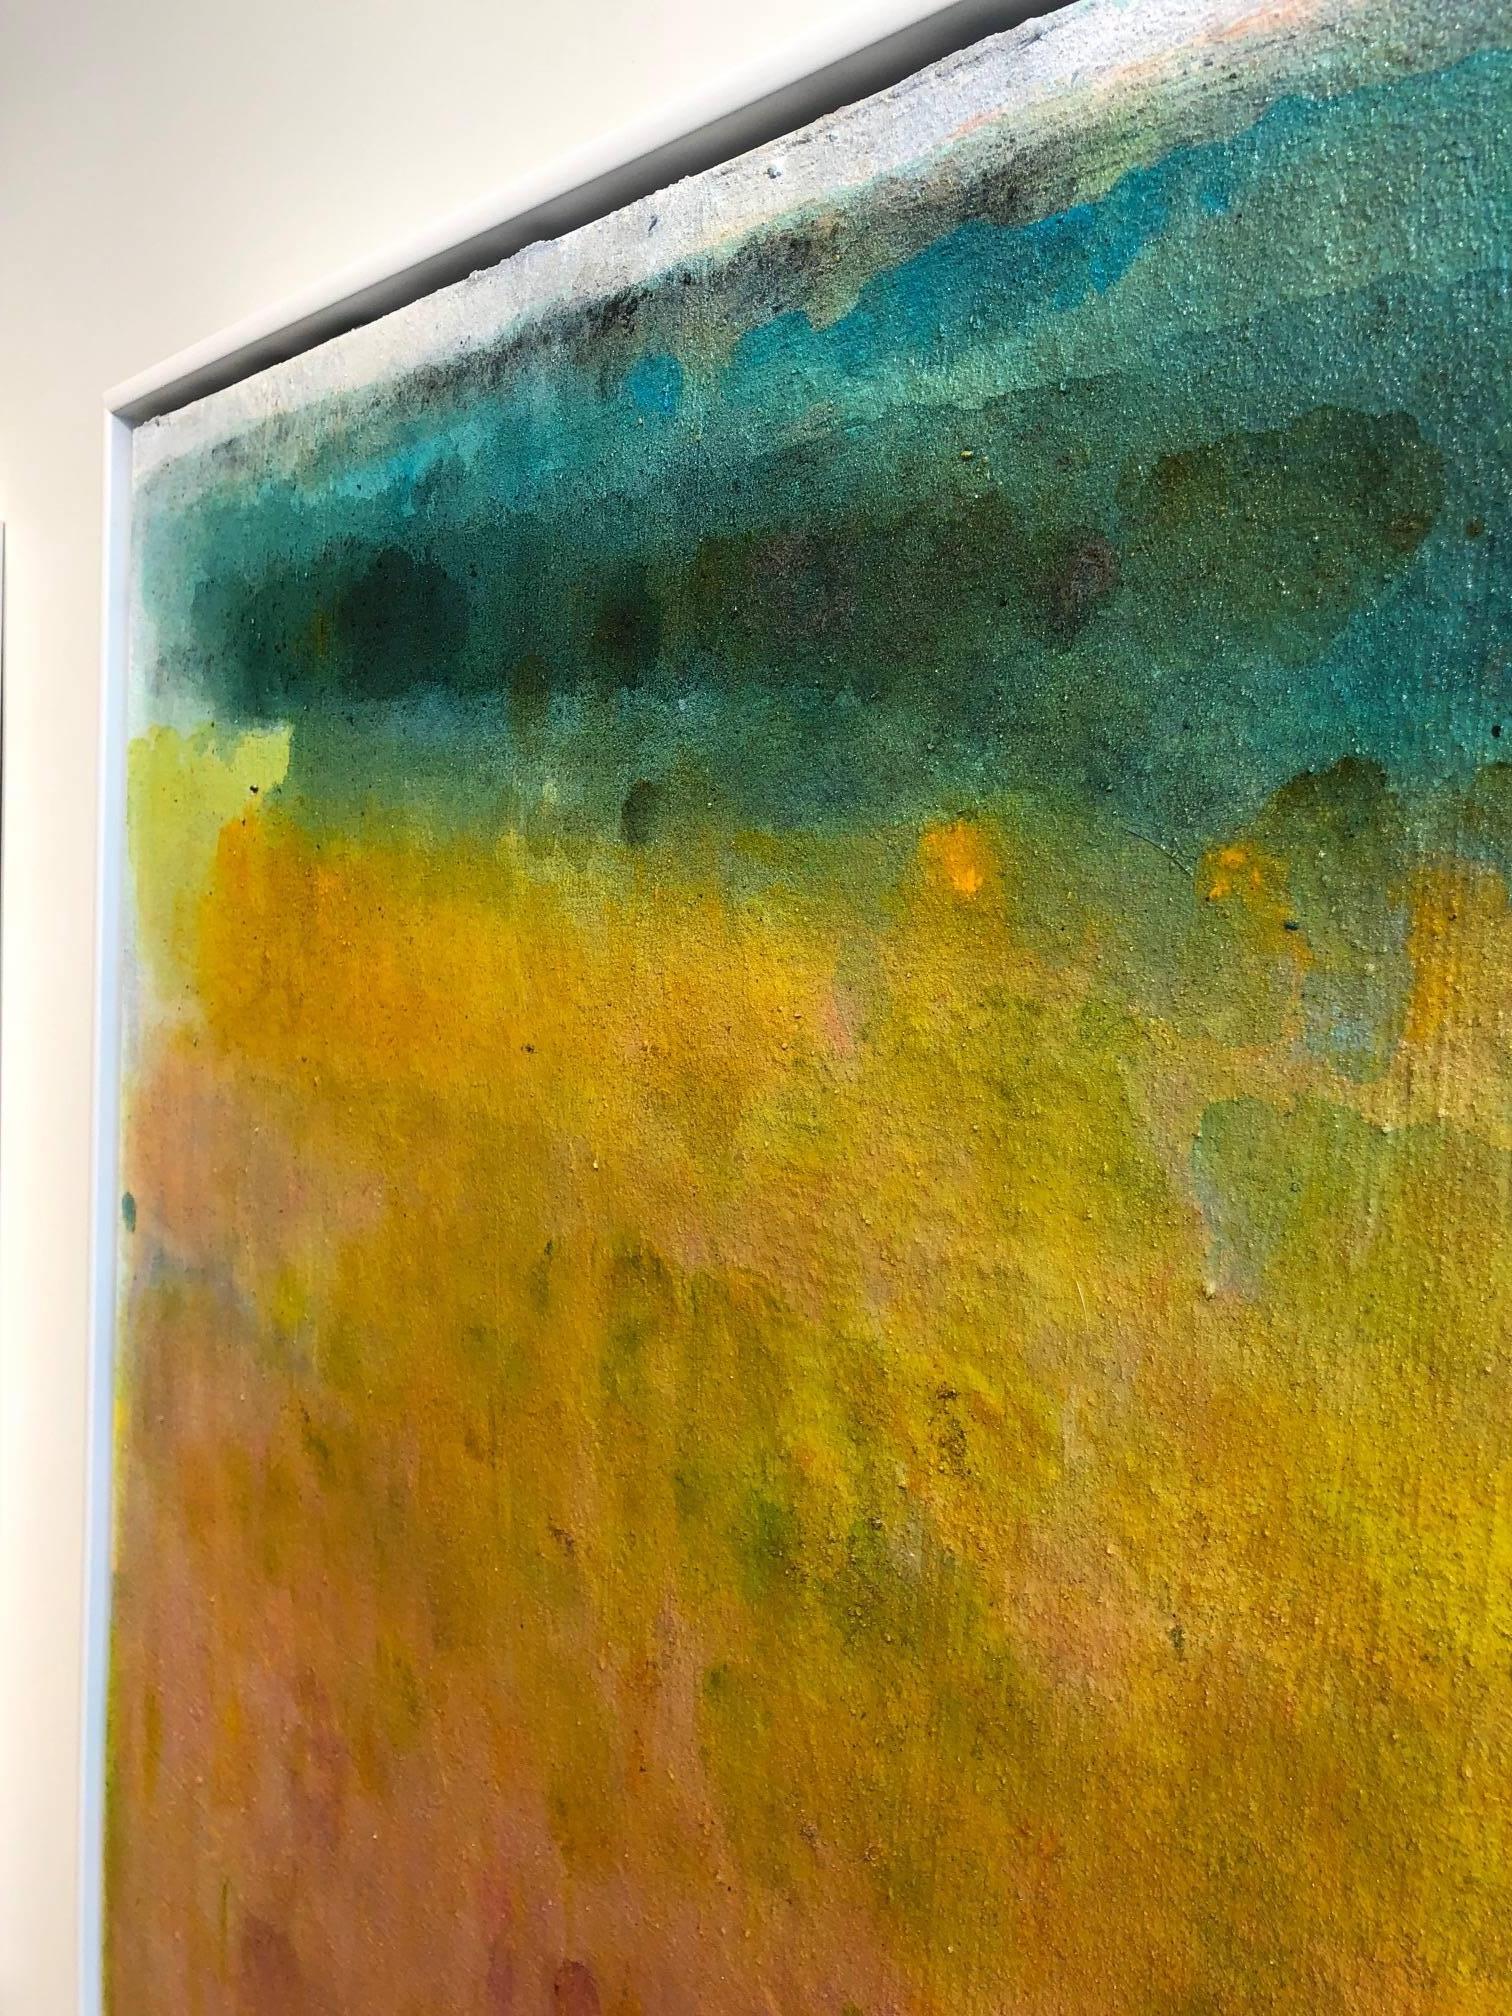 Rothko-esque color field painting that delights from a distance and up close from Swedish-American visual artist Charlotte Bernstrom, who creates acrylic paintings that are poetic explorations depicting nature and humanity’s place within it. Taking